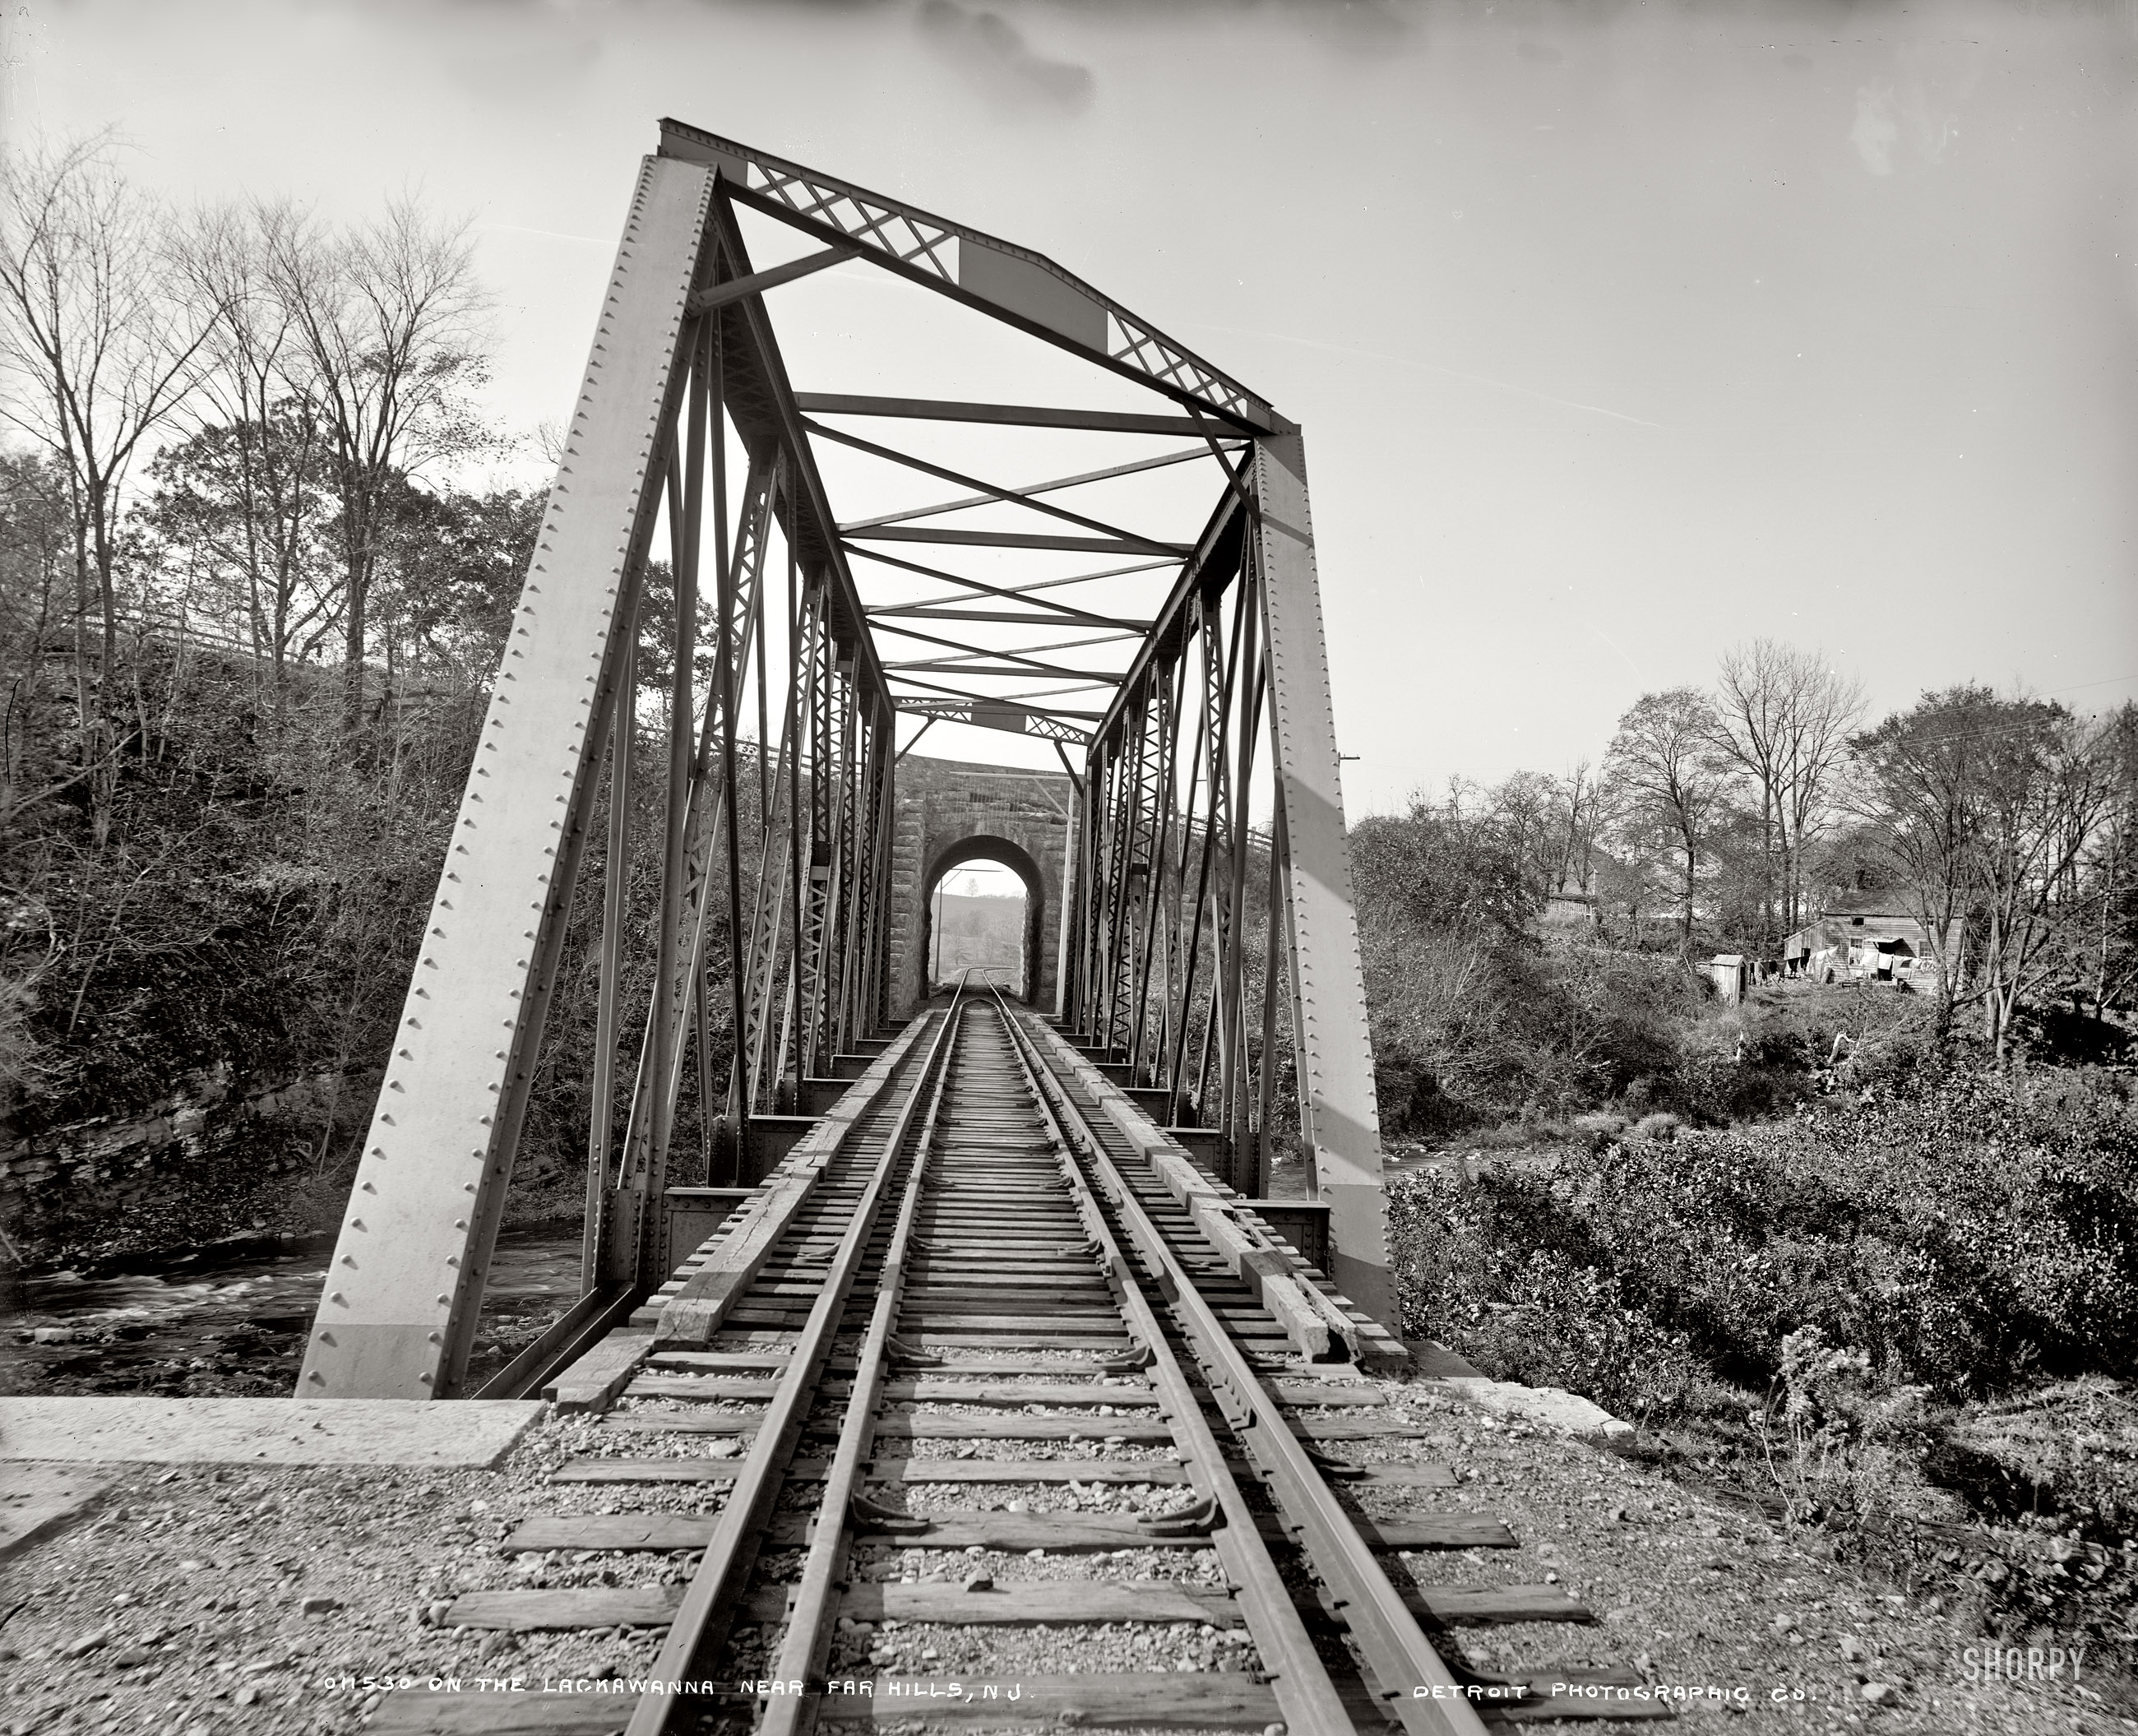 New Jersey circa 1900. "On the Lackawanna near Far Hills." With the bridge and little white house seen in the previous post. Detroit Publishing. View full size.